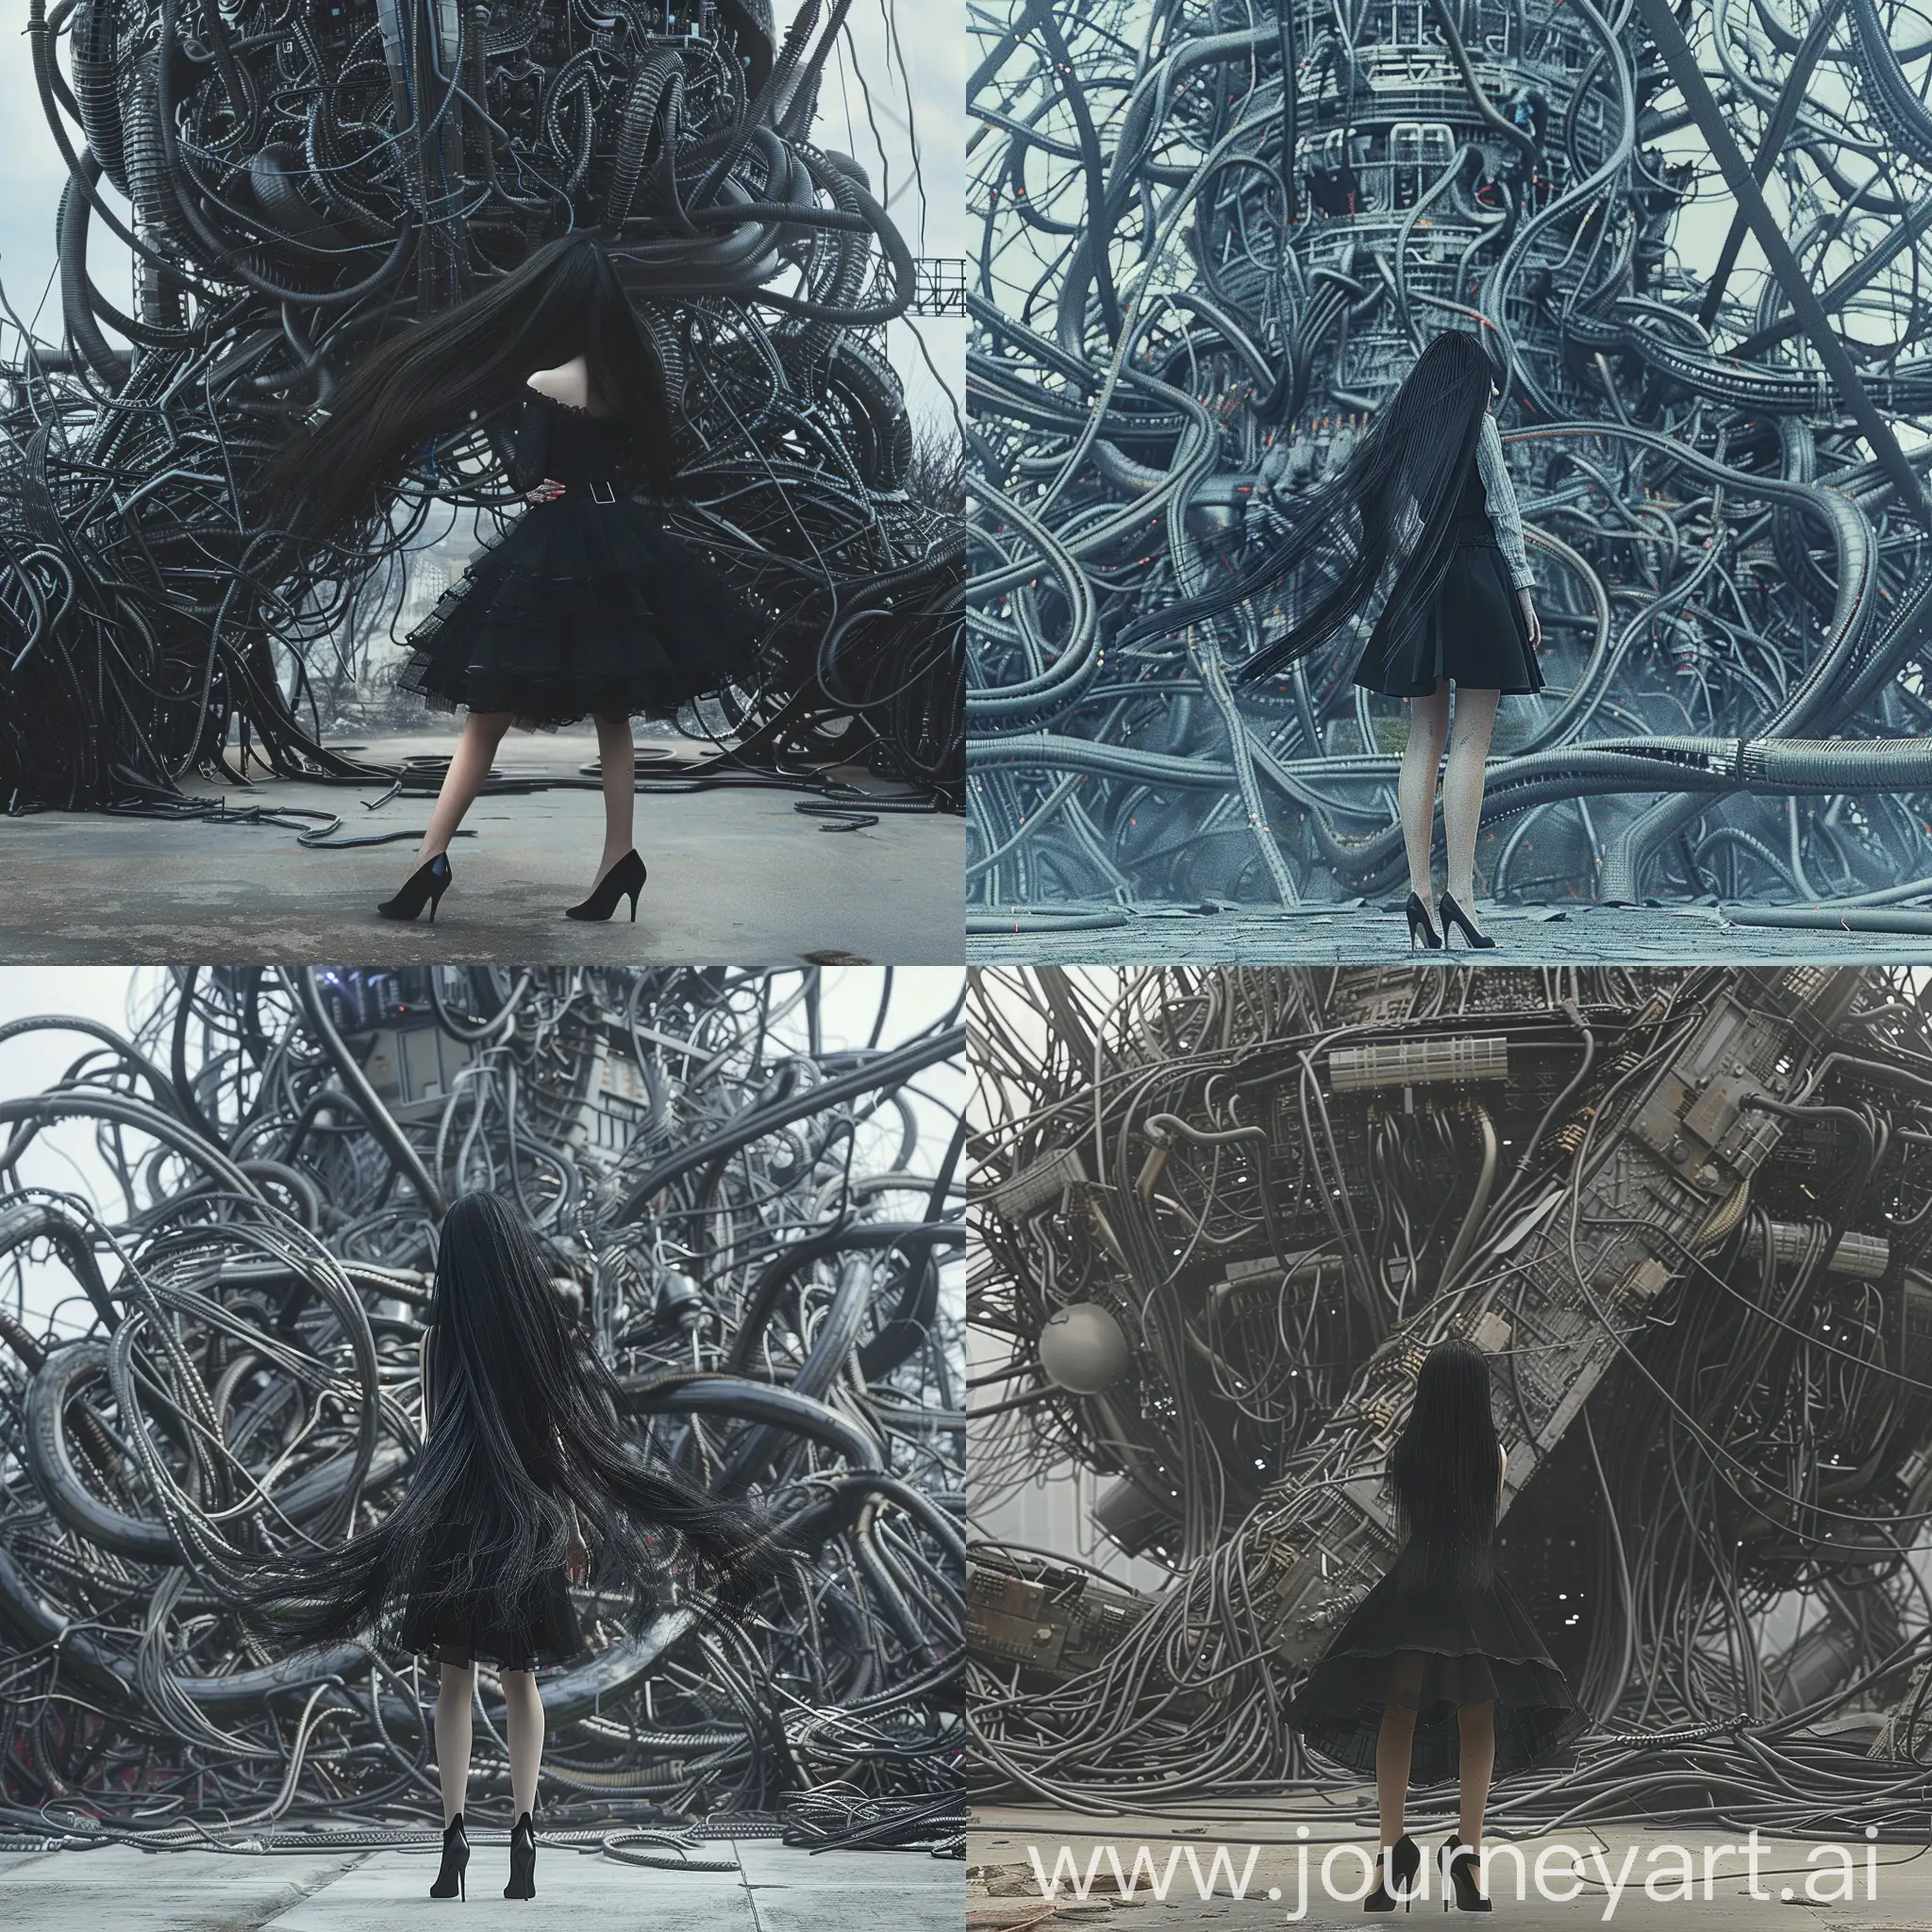 a beauty girl, full body, no face , with black long hair, black skirt, high heels, standing in front of an outdoor alien high-tech device. The device is as high as three stories, spanning the full width of the screen, filled with large, tangled p